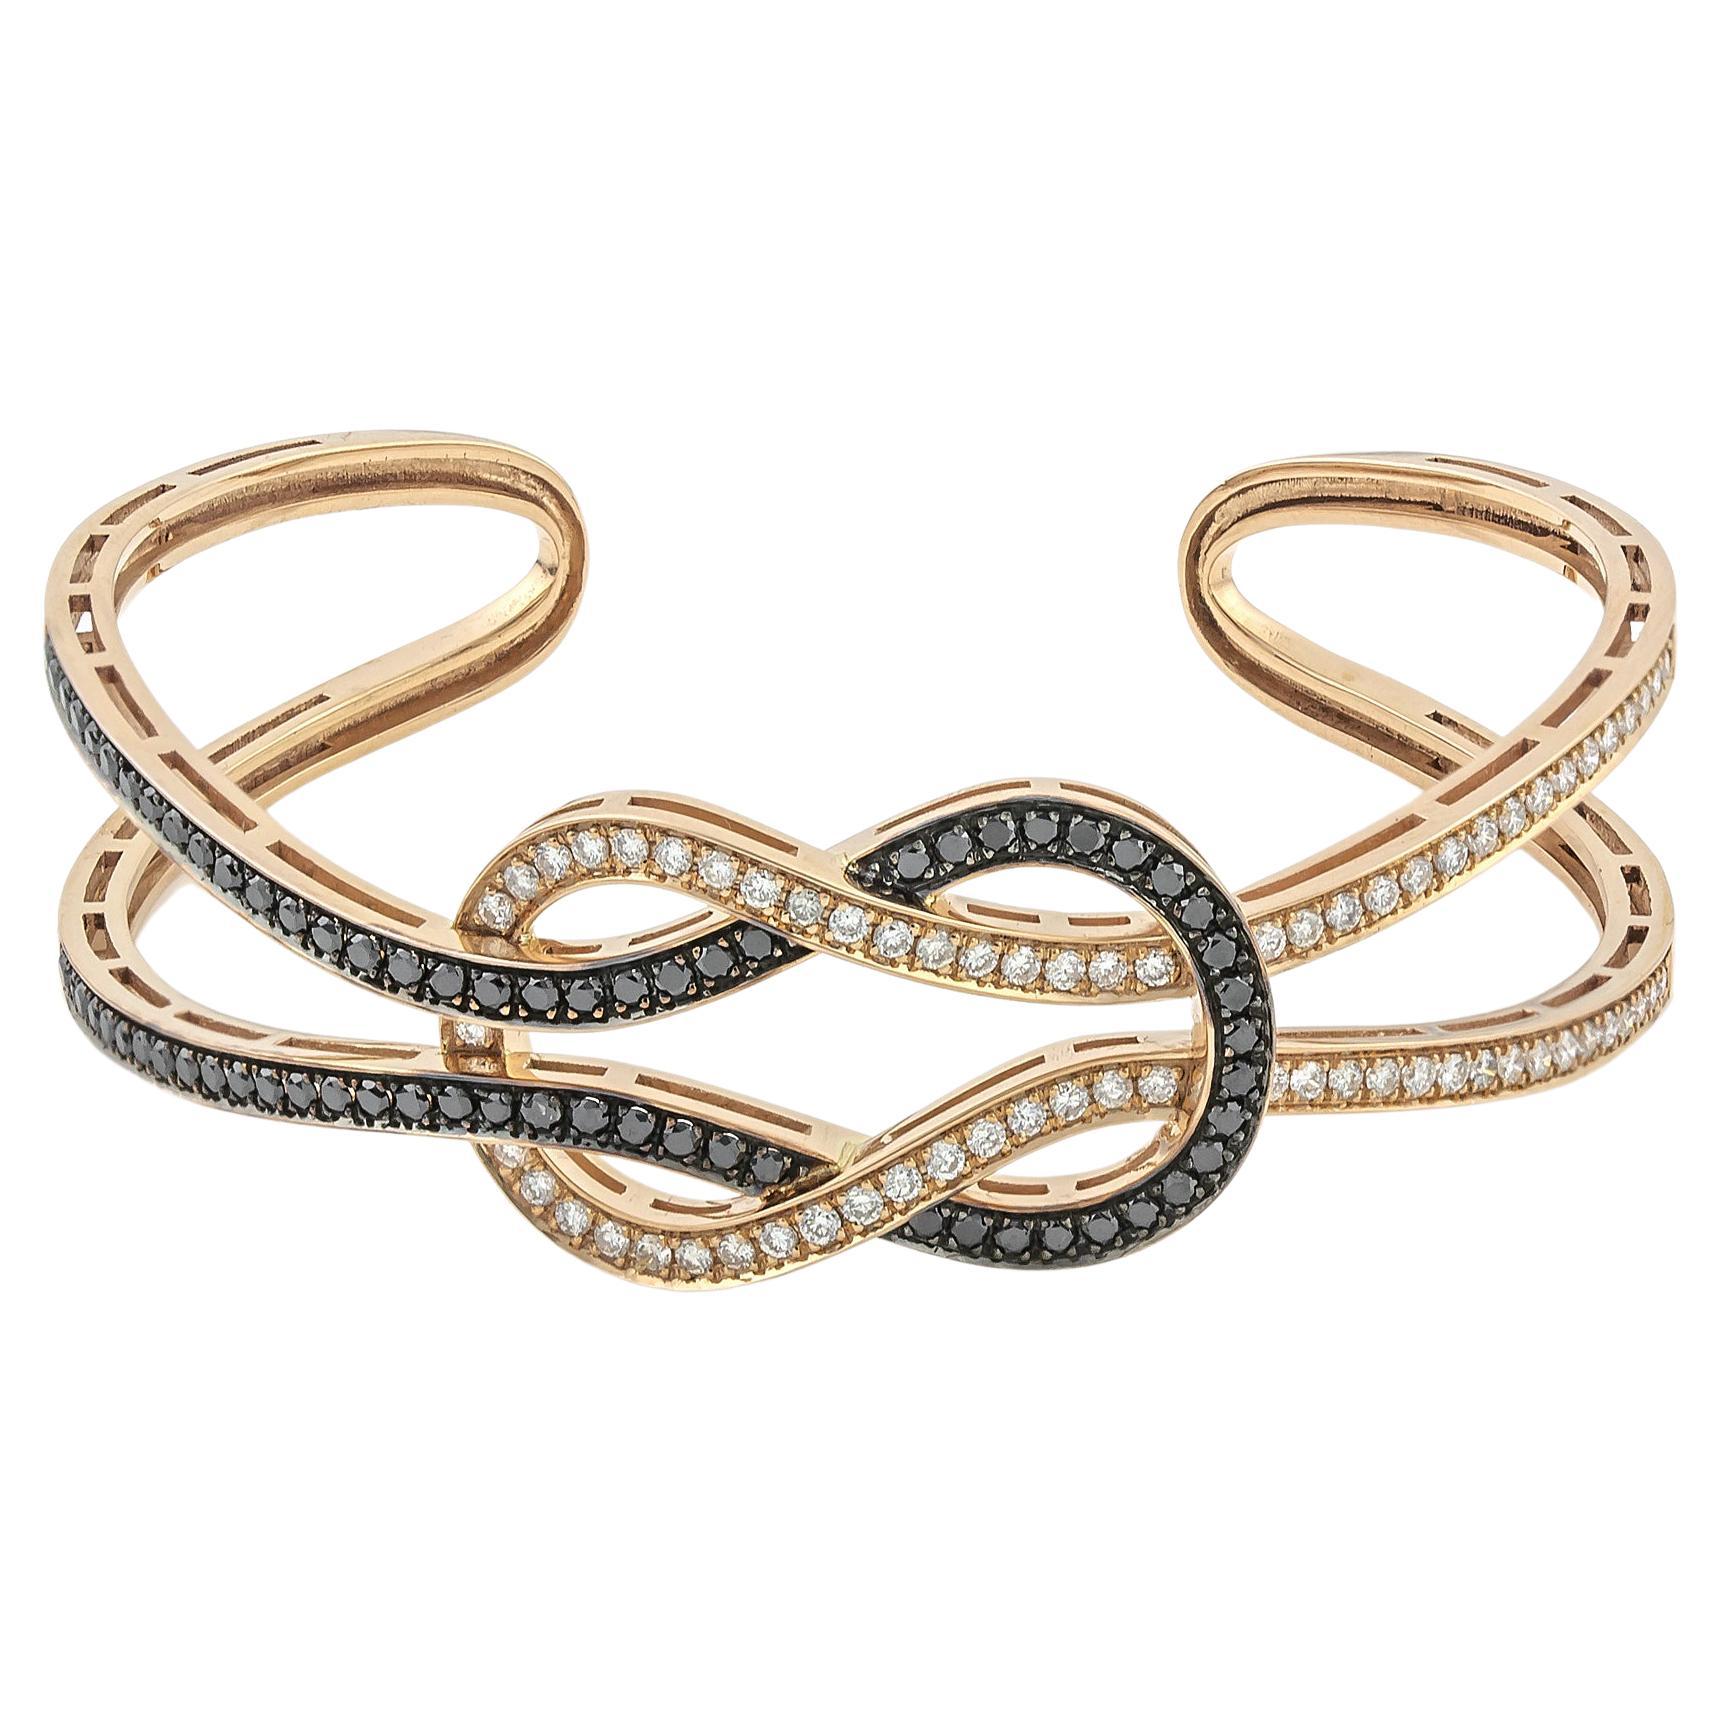 Hercules Knot or Love Knot Open Bangle cuff Bracelet in 18Kt Yellow Gold with Black & White Pave Diamonds.
Also known as the Marriage Knot, the Hercules Knot is a symbol that stands for undying love and commitment. This-One-of-a-kind Bangle Bracelet